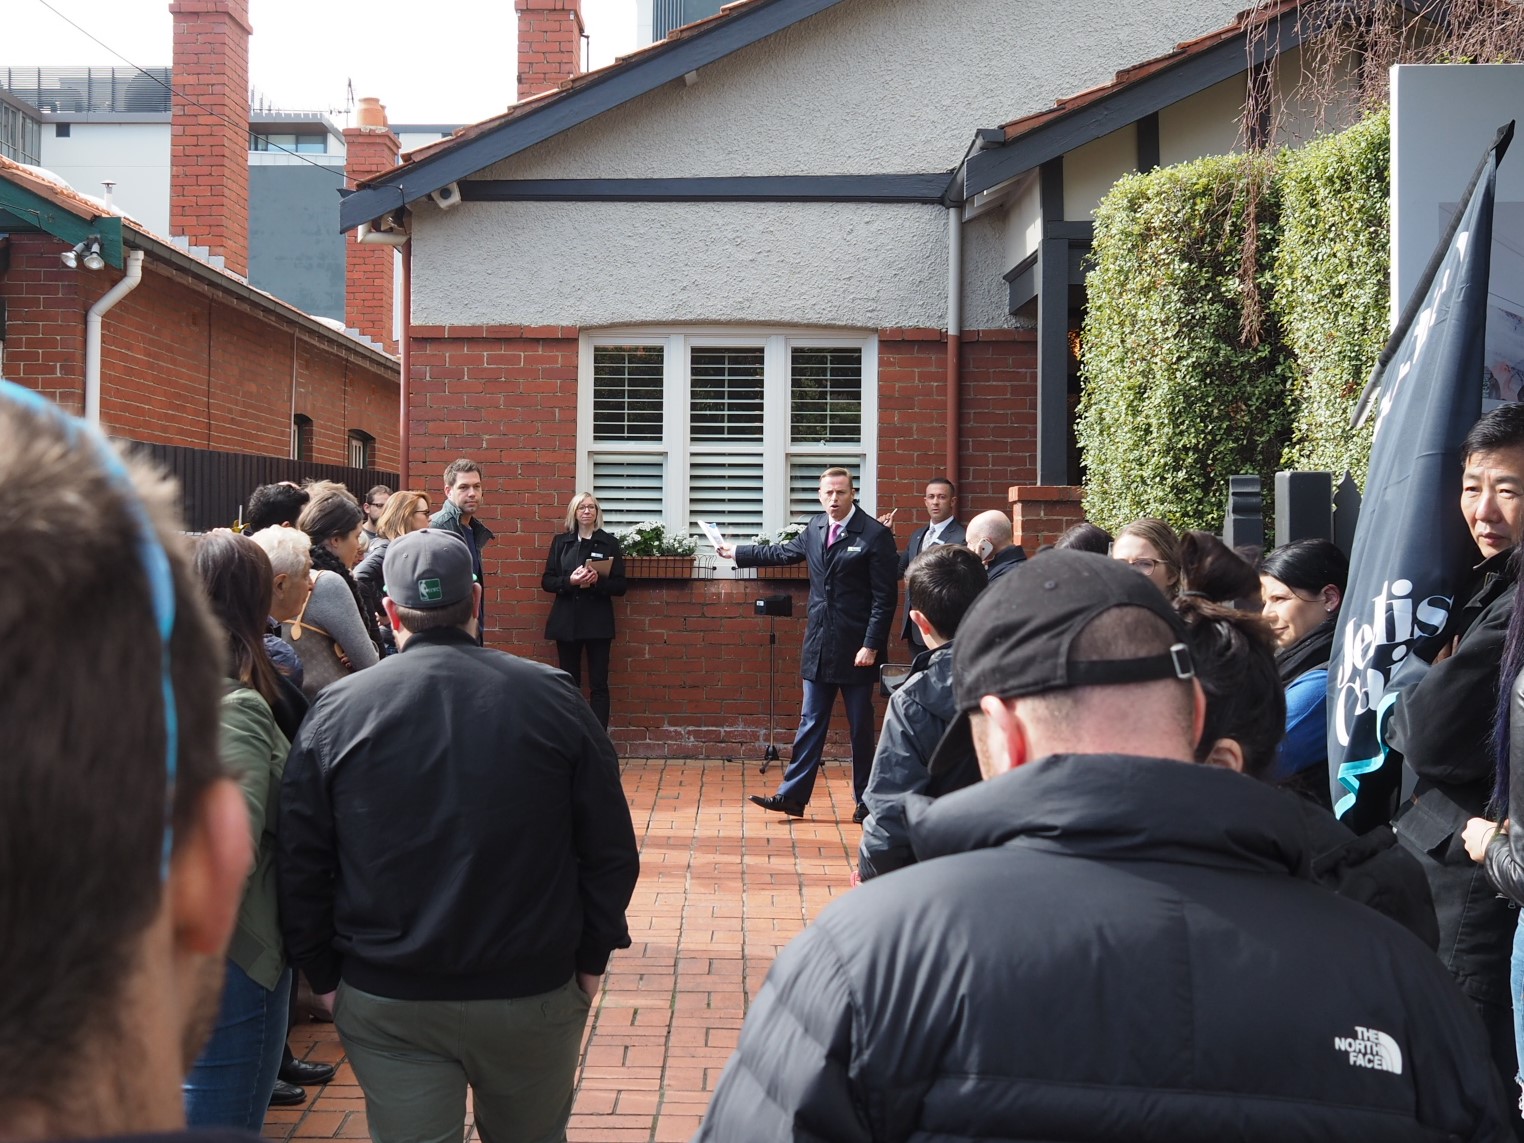 Auction snapshot - Auction in front of brick house